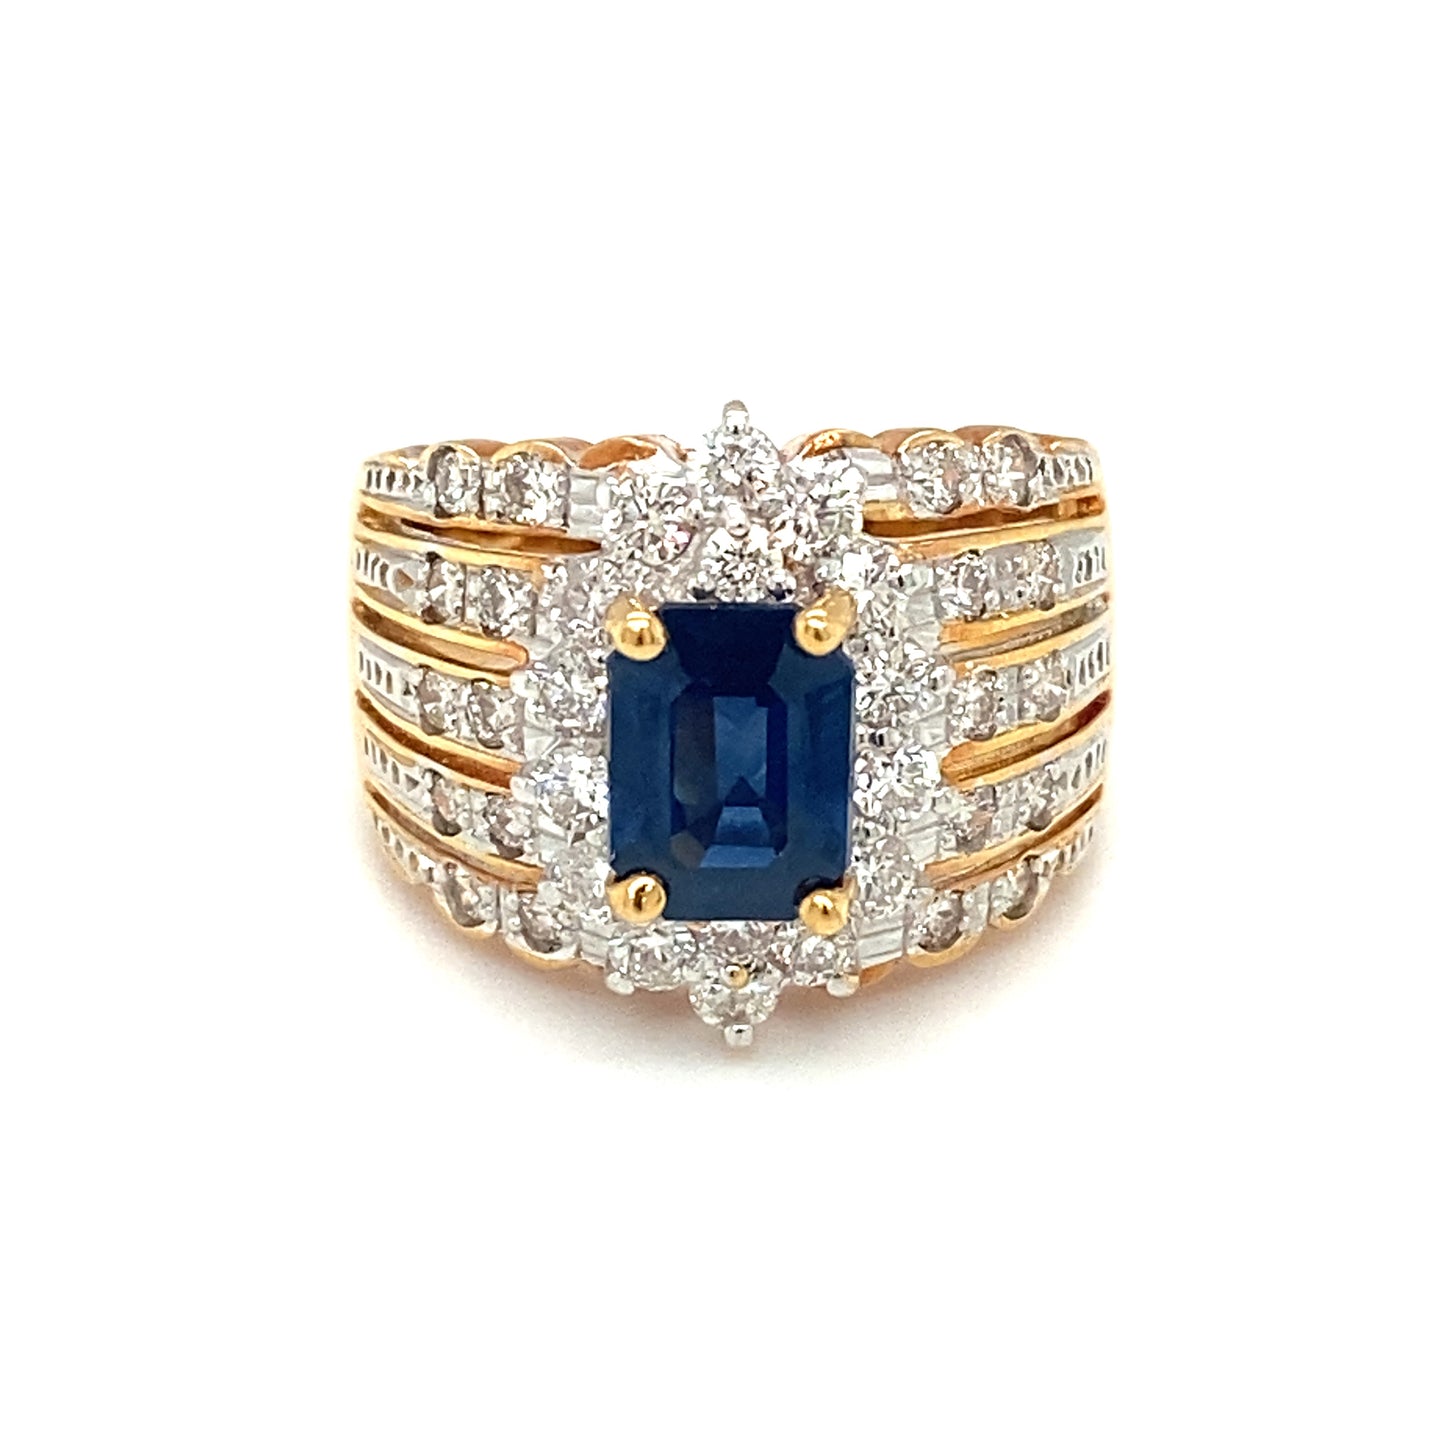 LE VIAN 1.05ct Emerald Cut Sapphire and Diamond Ring in 18K Gold